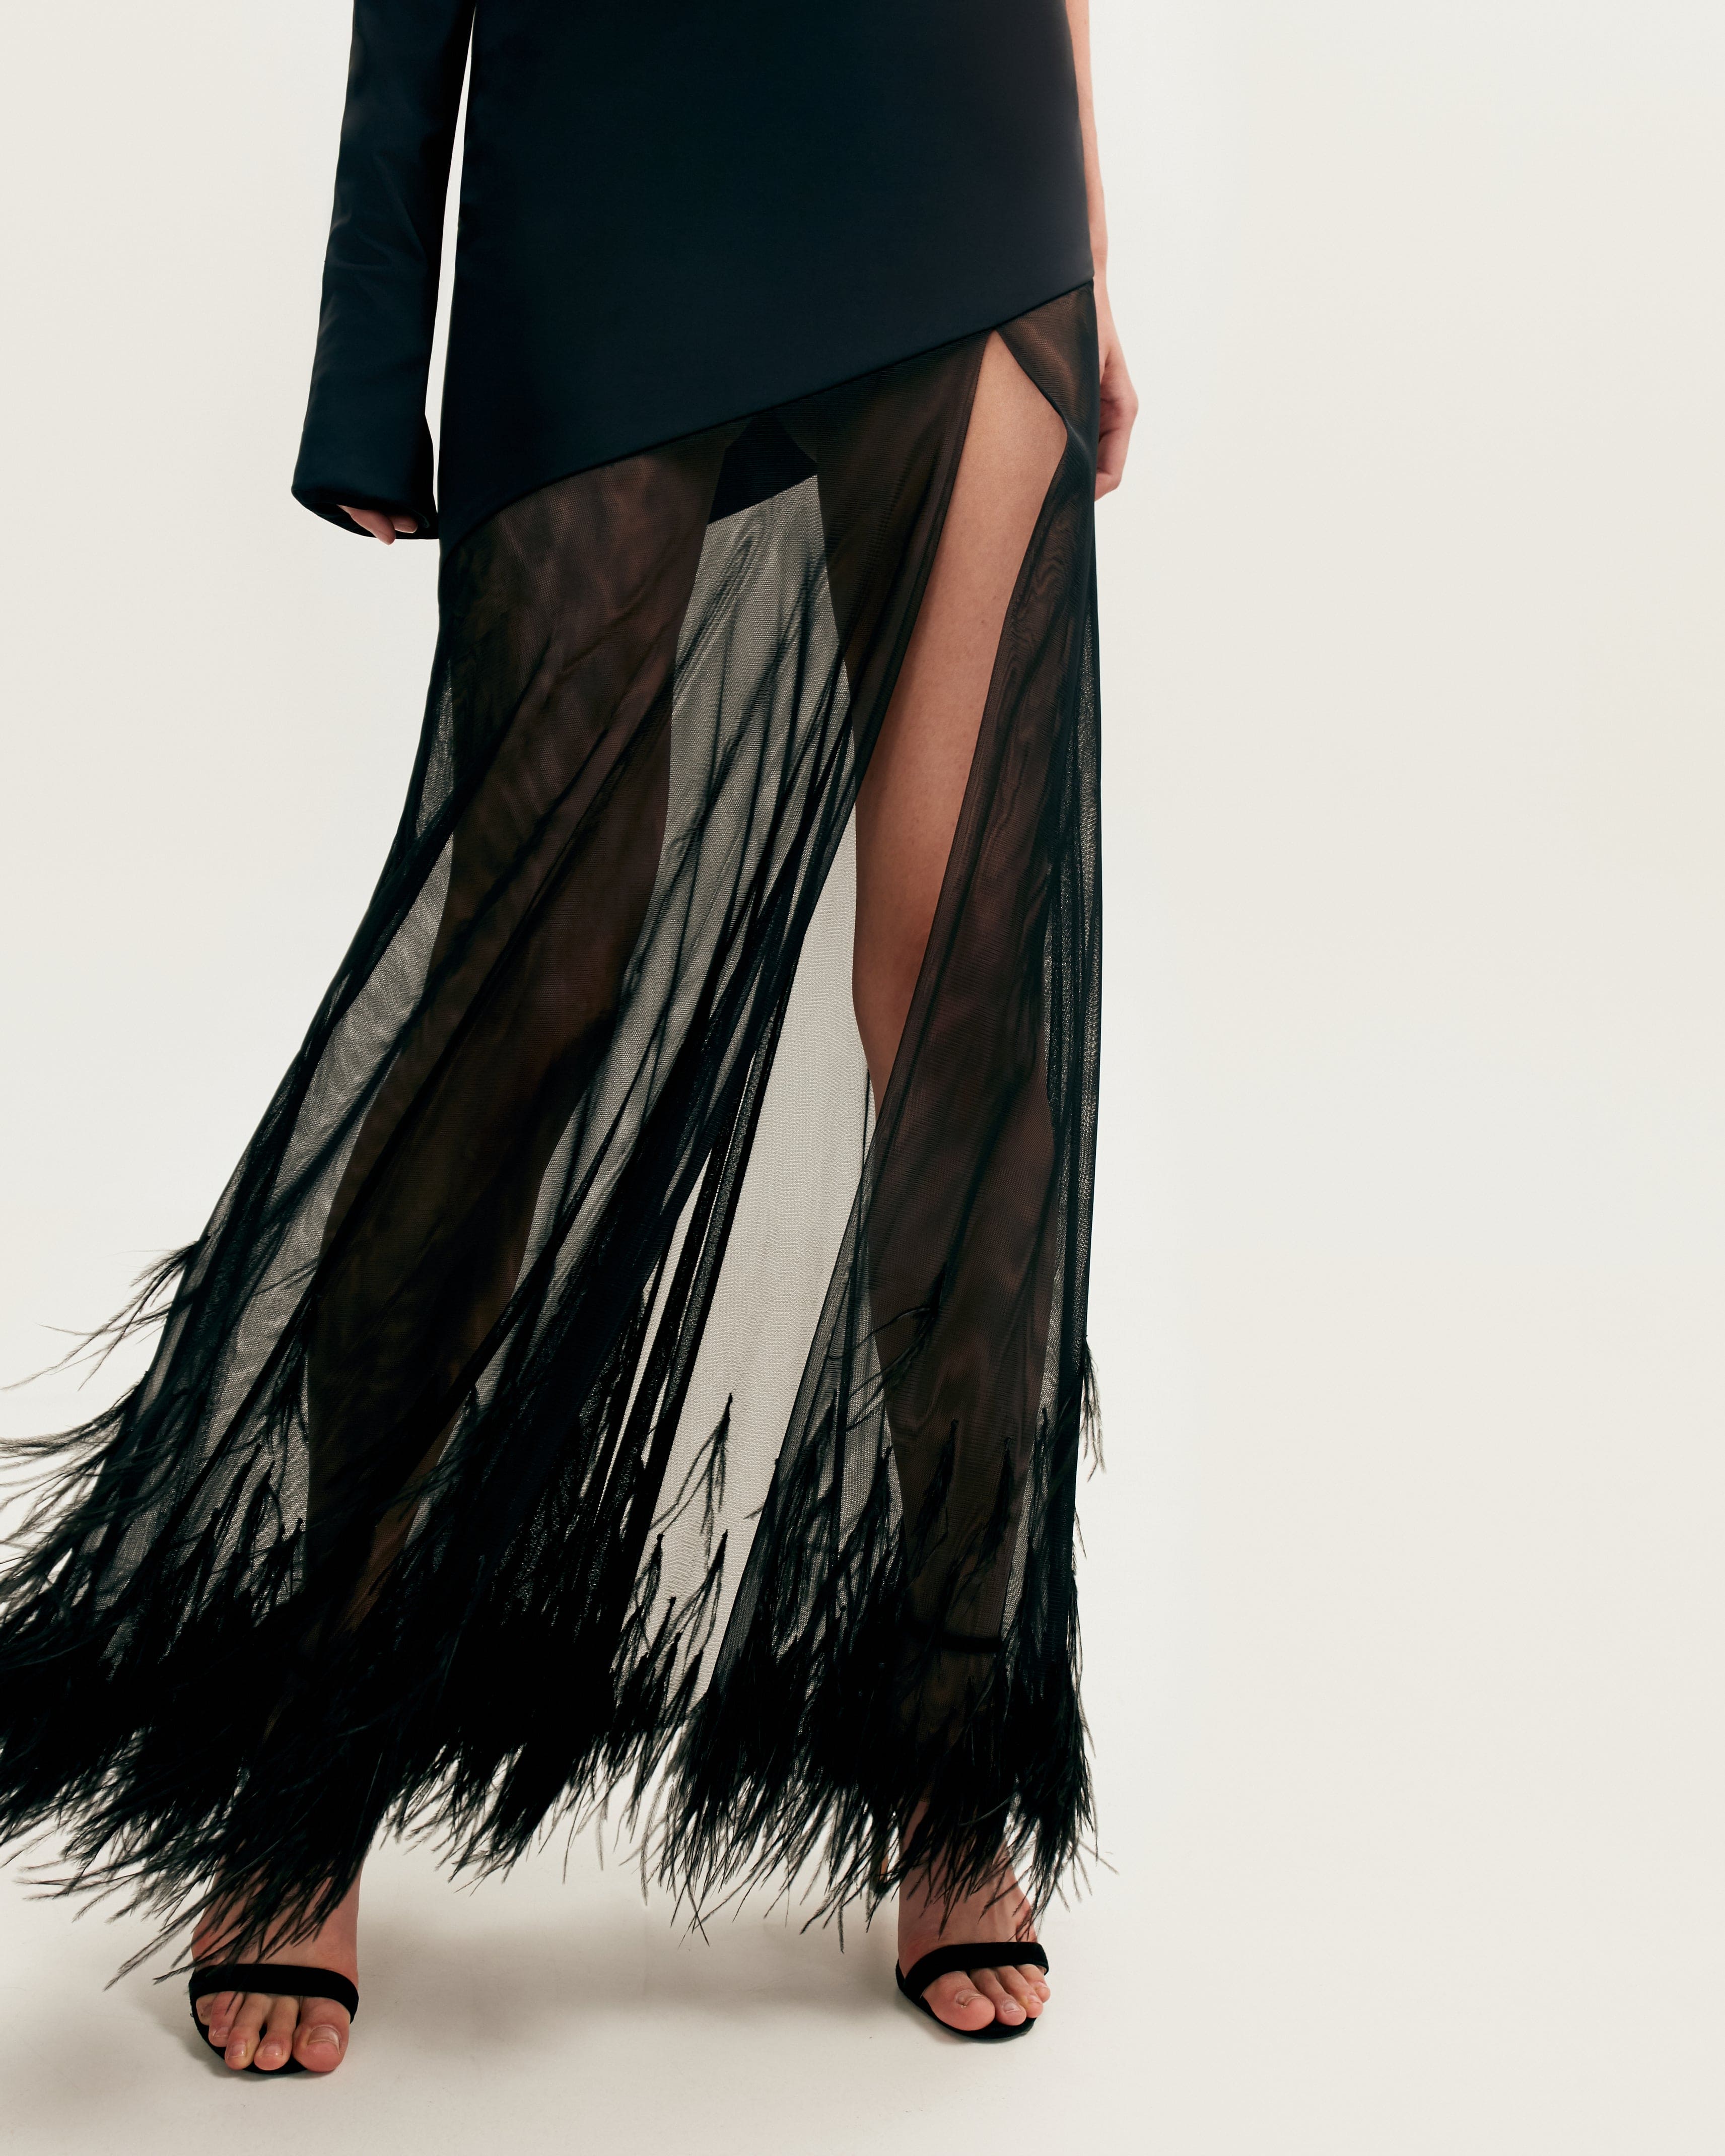 One-shoulder maxi dress with feather-trimmed bottom, Xo Xo